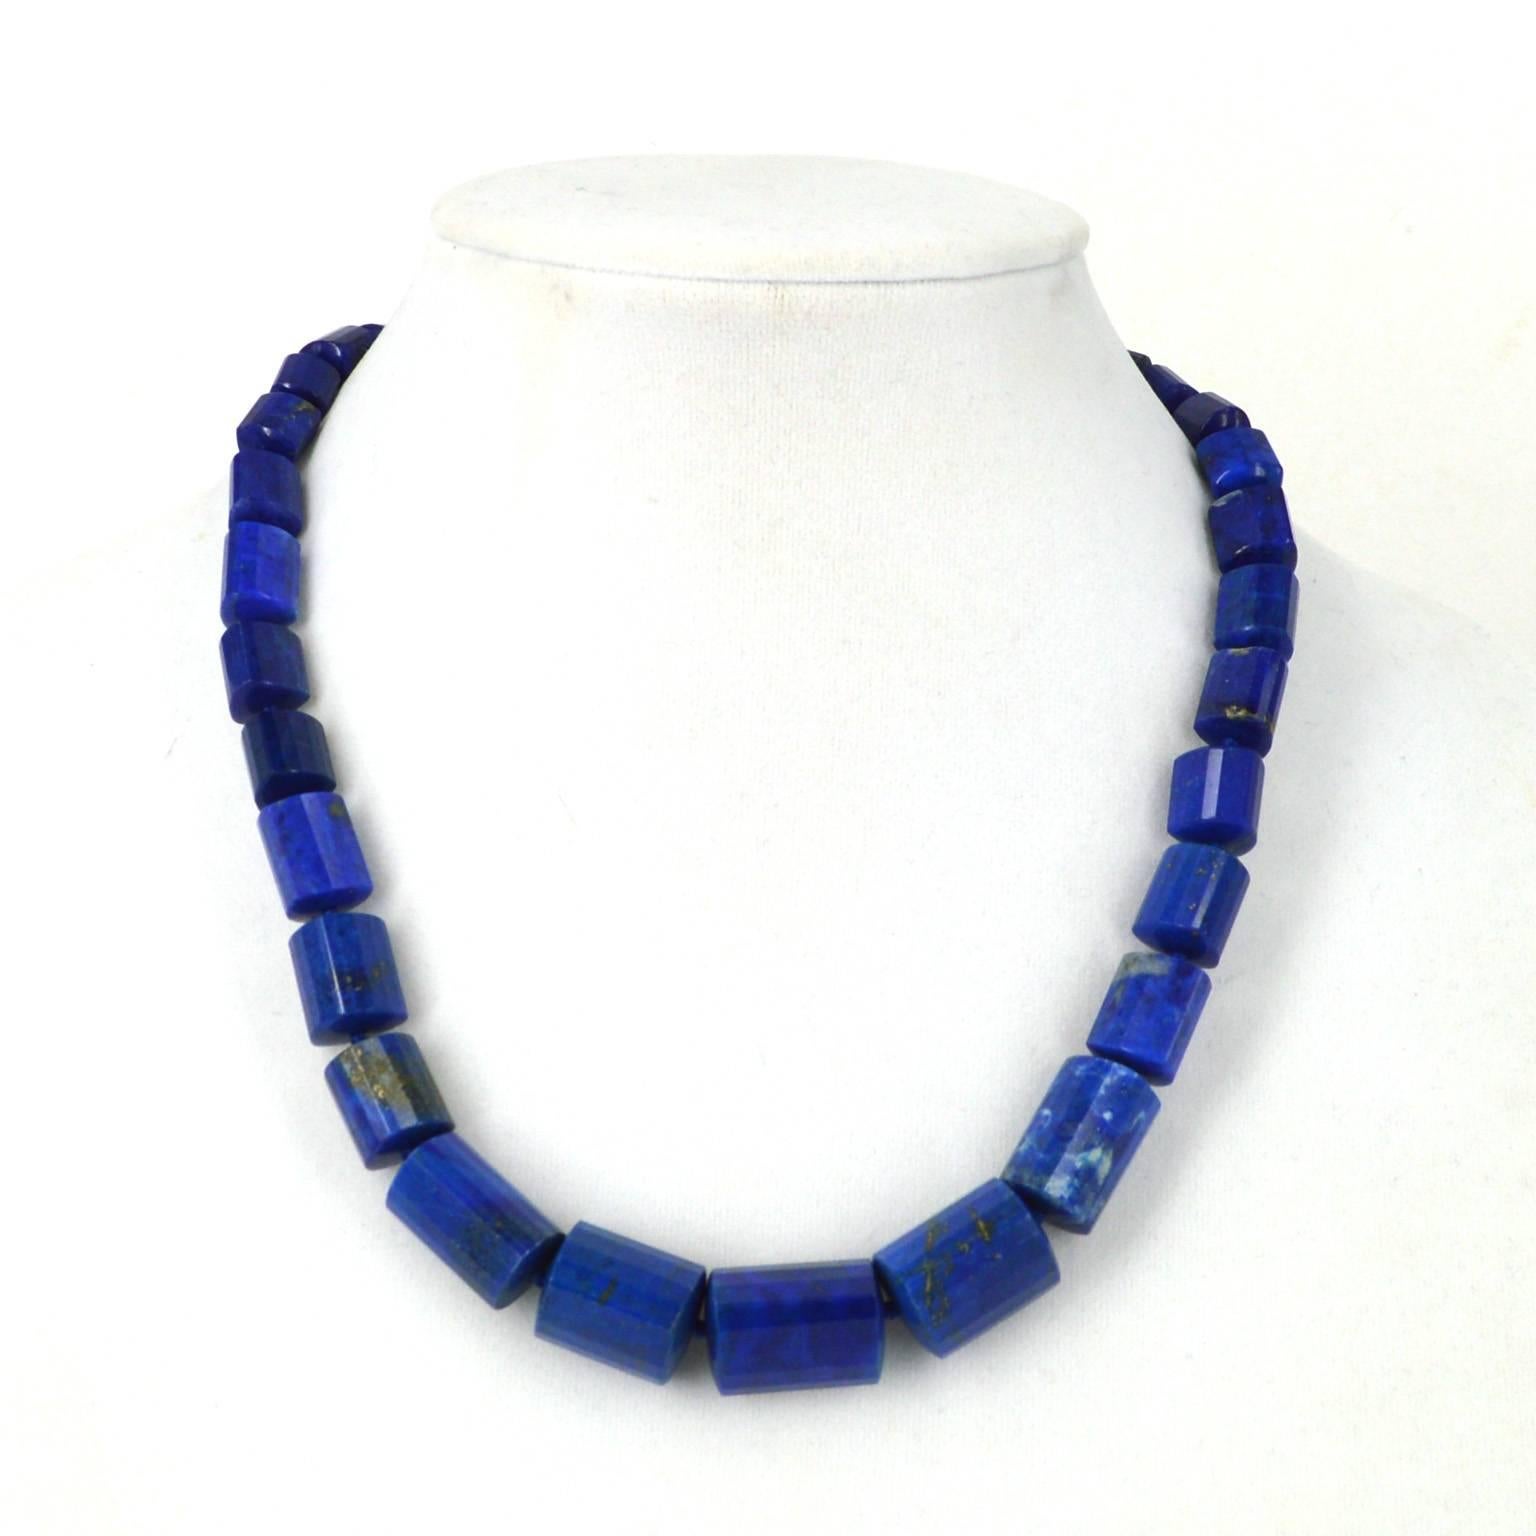 Stunning faceted Lapis Lazuli tubes that graduate around the neckline.
Hand knotted on navy thread with an 8mm vermeil ball clasp.
Total length of necklace 46cm.
Lapis graduates from 8mm - 20mm.

All stones are natural and as such may include